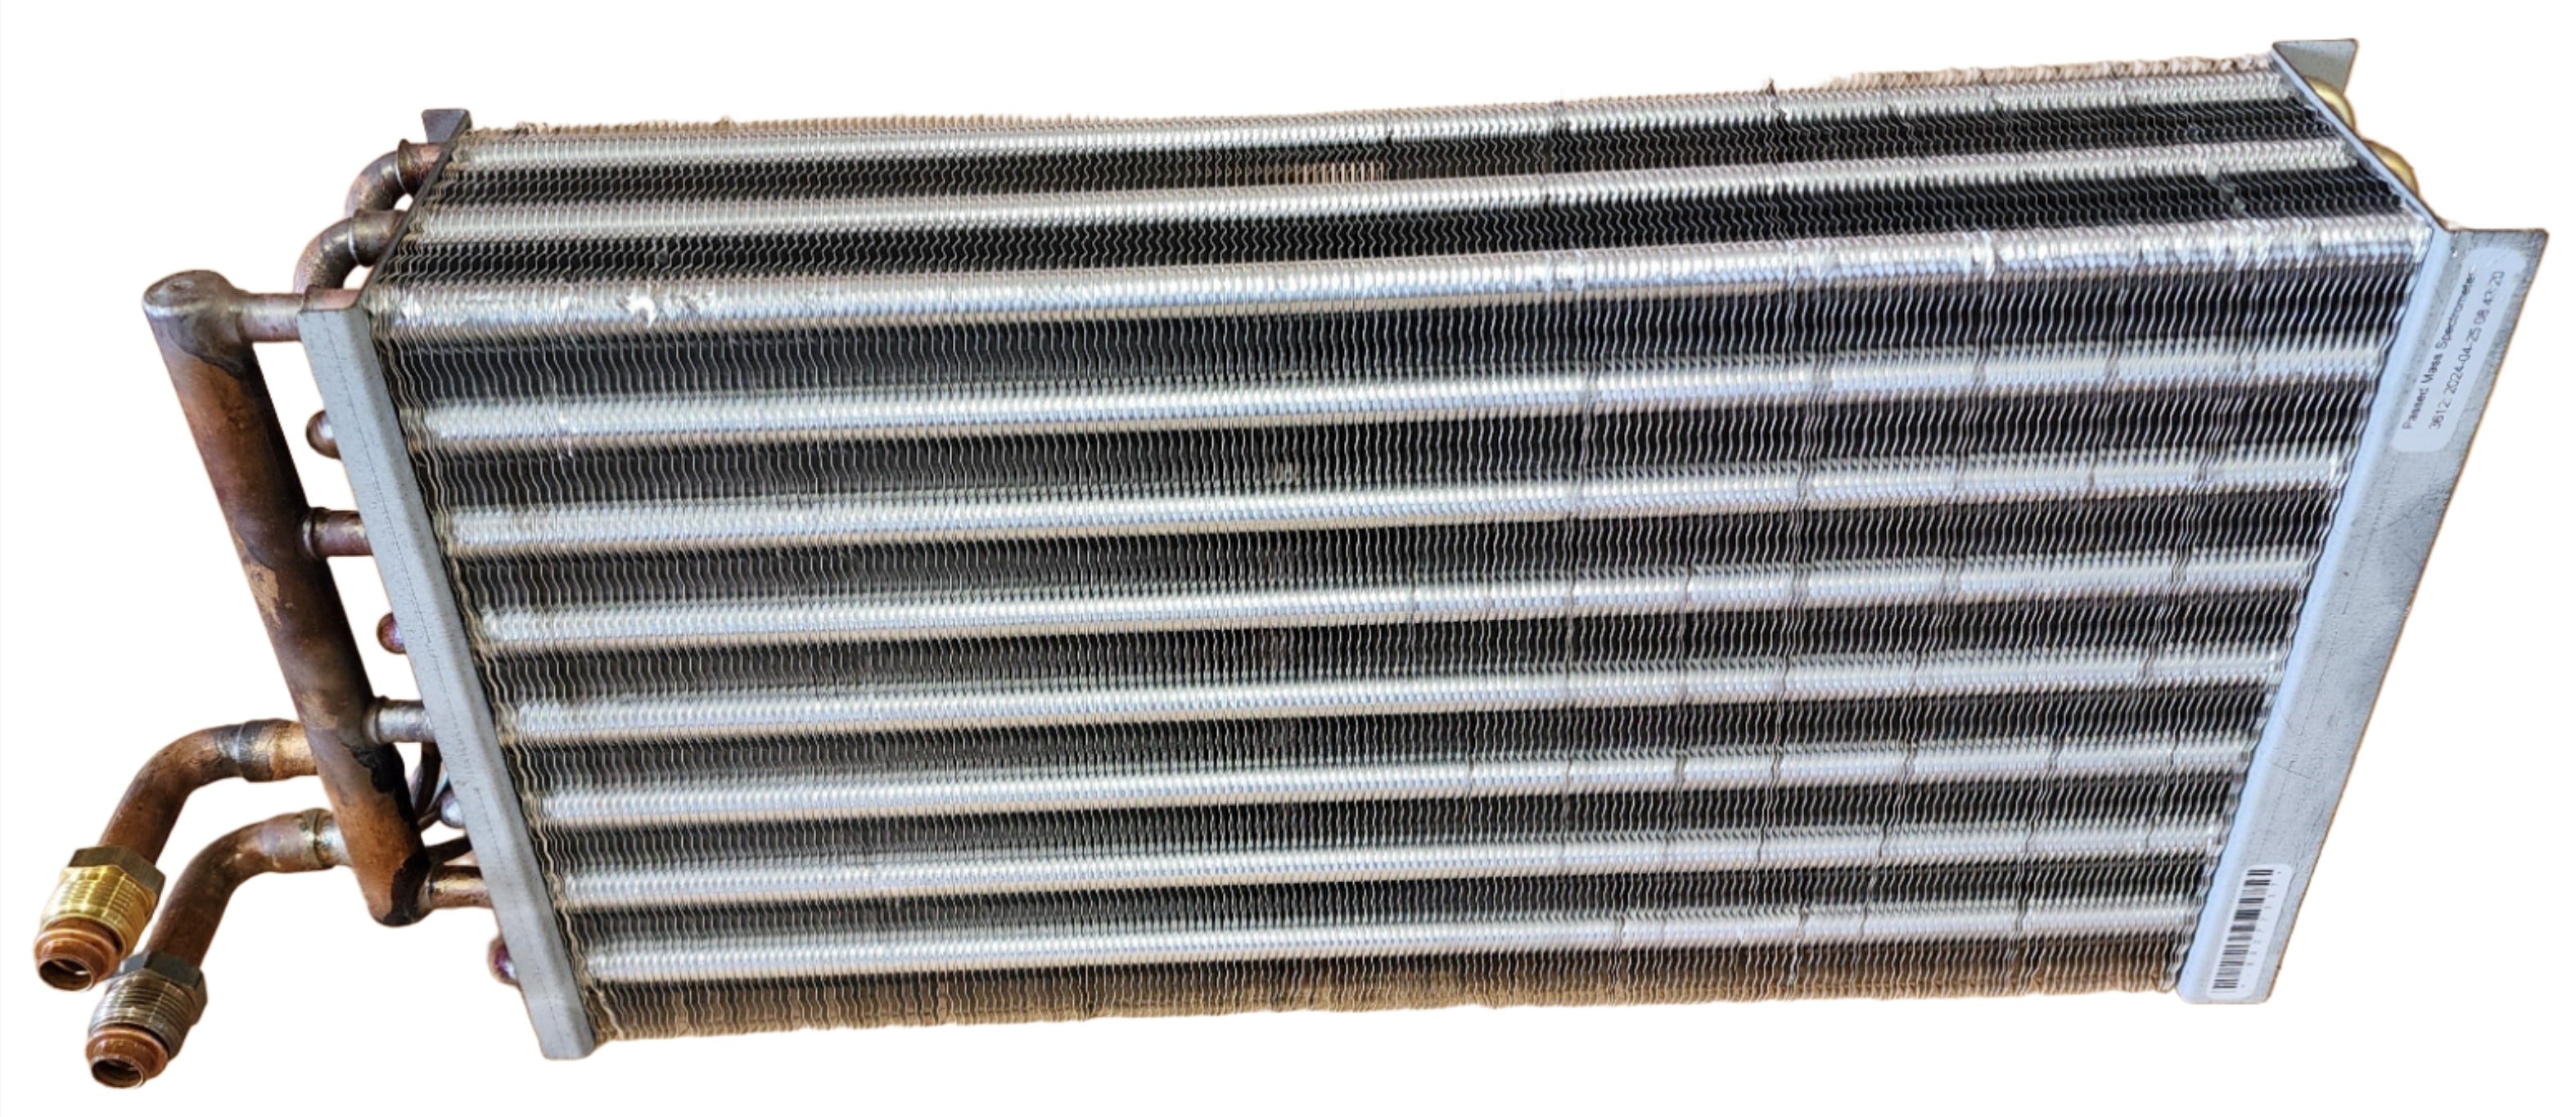 AC Evaporator Coil Core for Red Dot R-5040 R-5045 R-5075 Units 76R7070